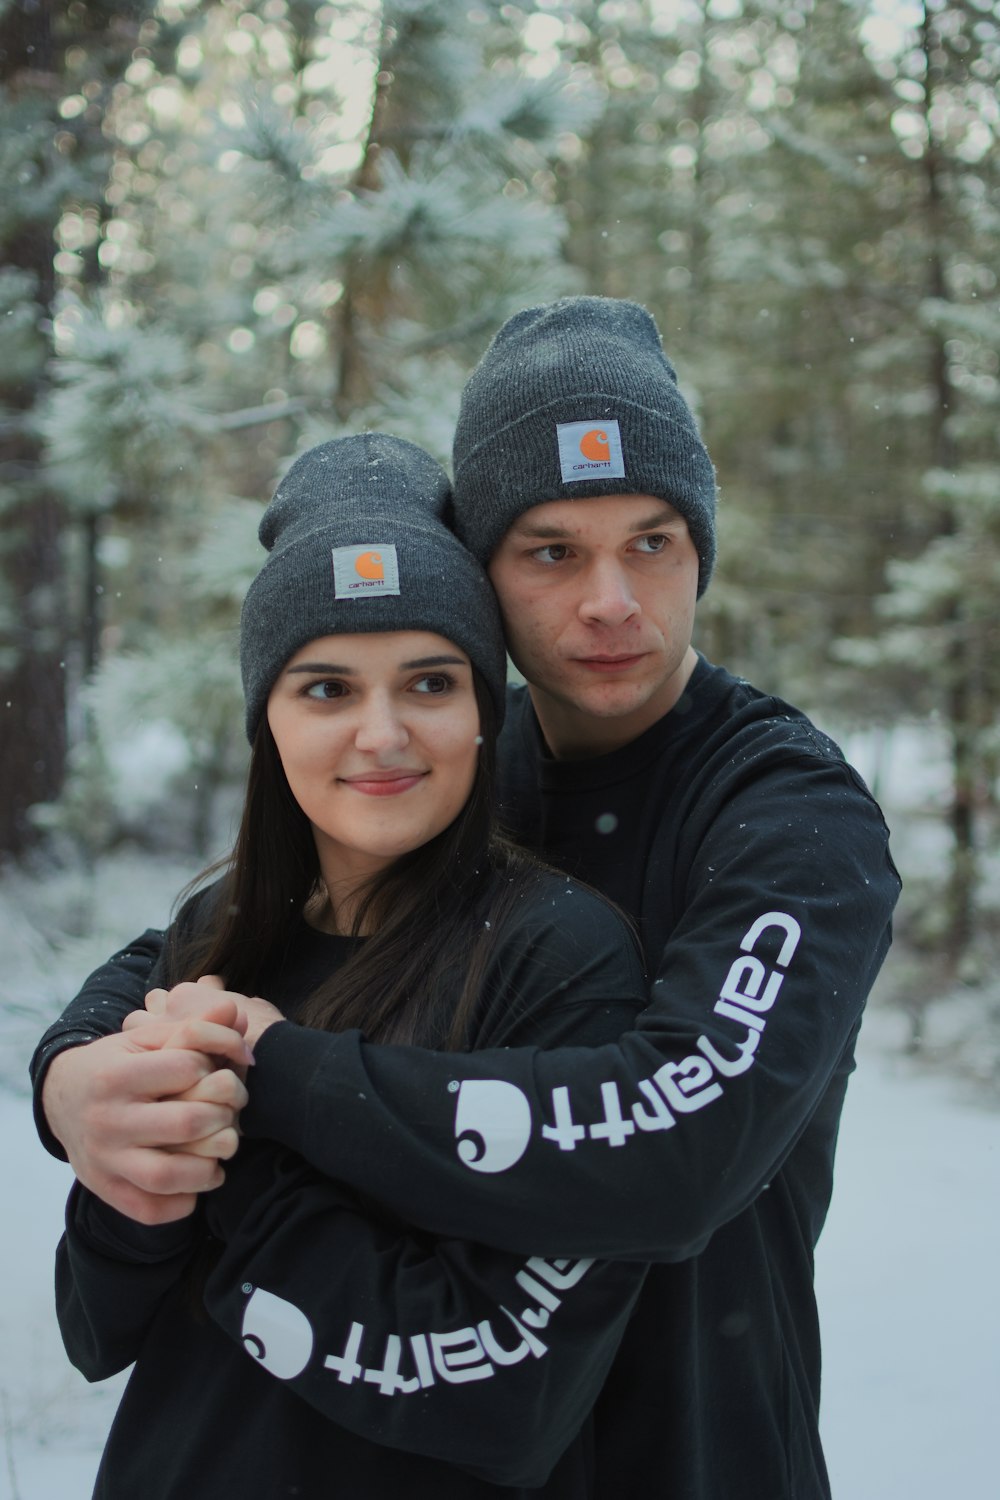 man and woman wearing black jacket and knit caps smiling